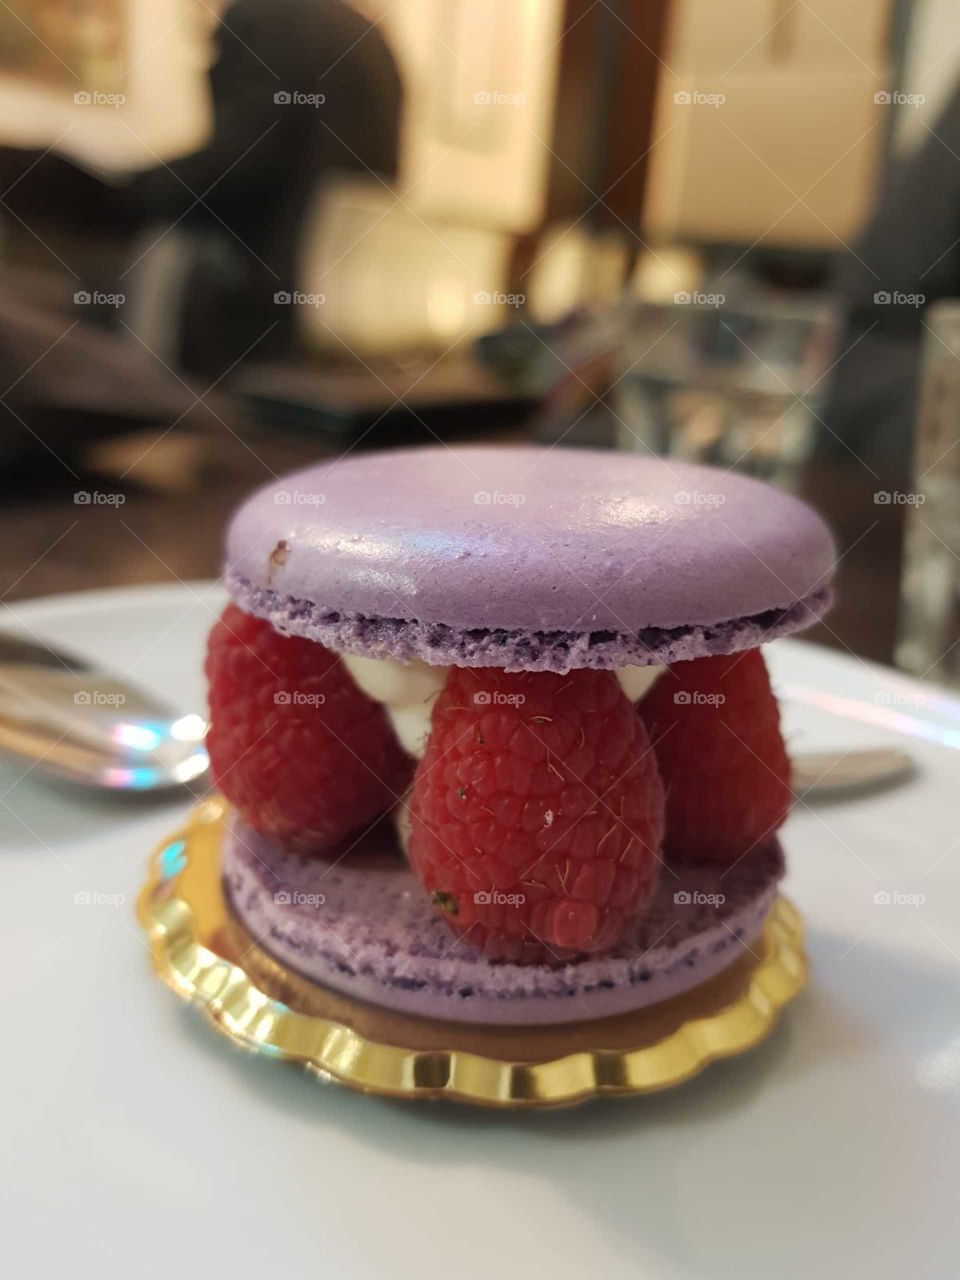 Sandwich macaron filled with chantilly cream and raspberries at the bar